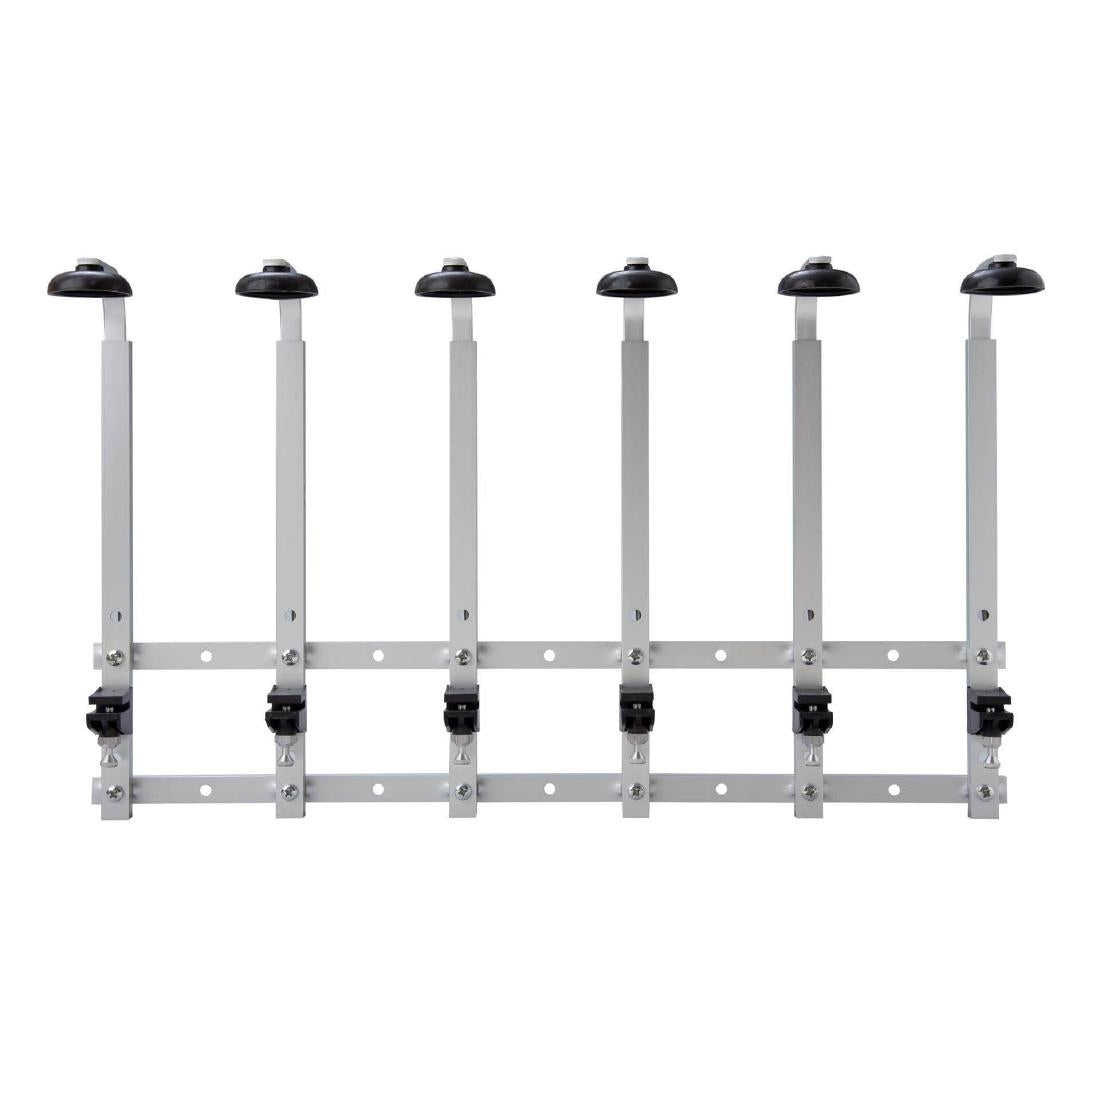 CZ369 Beaumont Six Bottle Wall Rack Bagged JD Catering Equipment Solutions Ltd